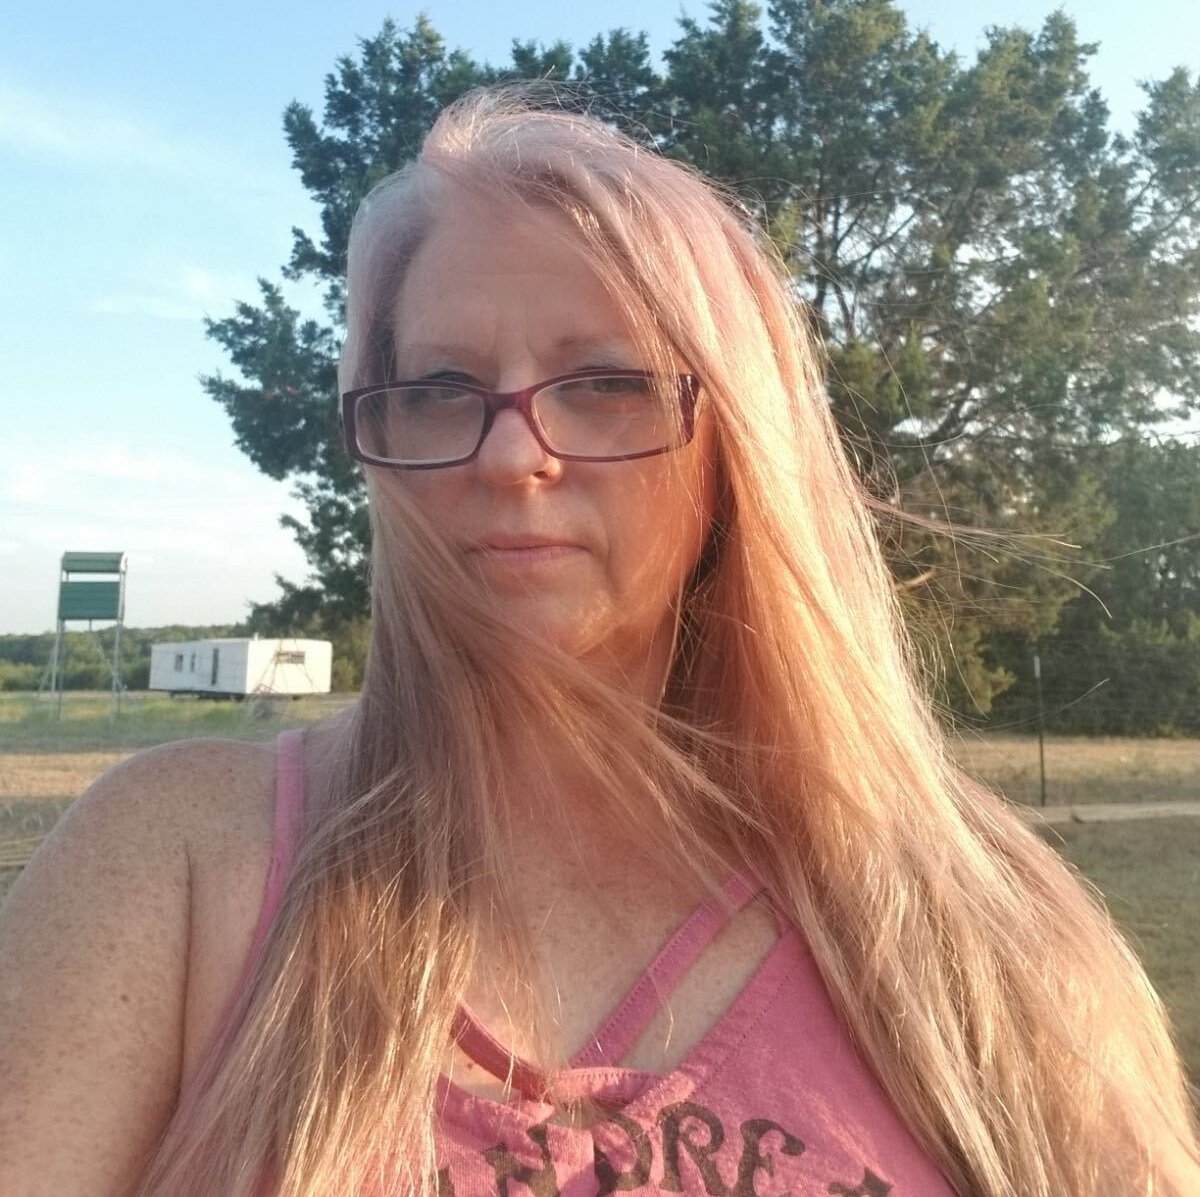 A woman wearing glasses and a pink shirt with the word here on it